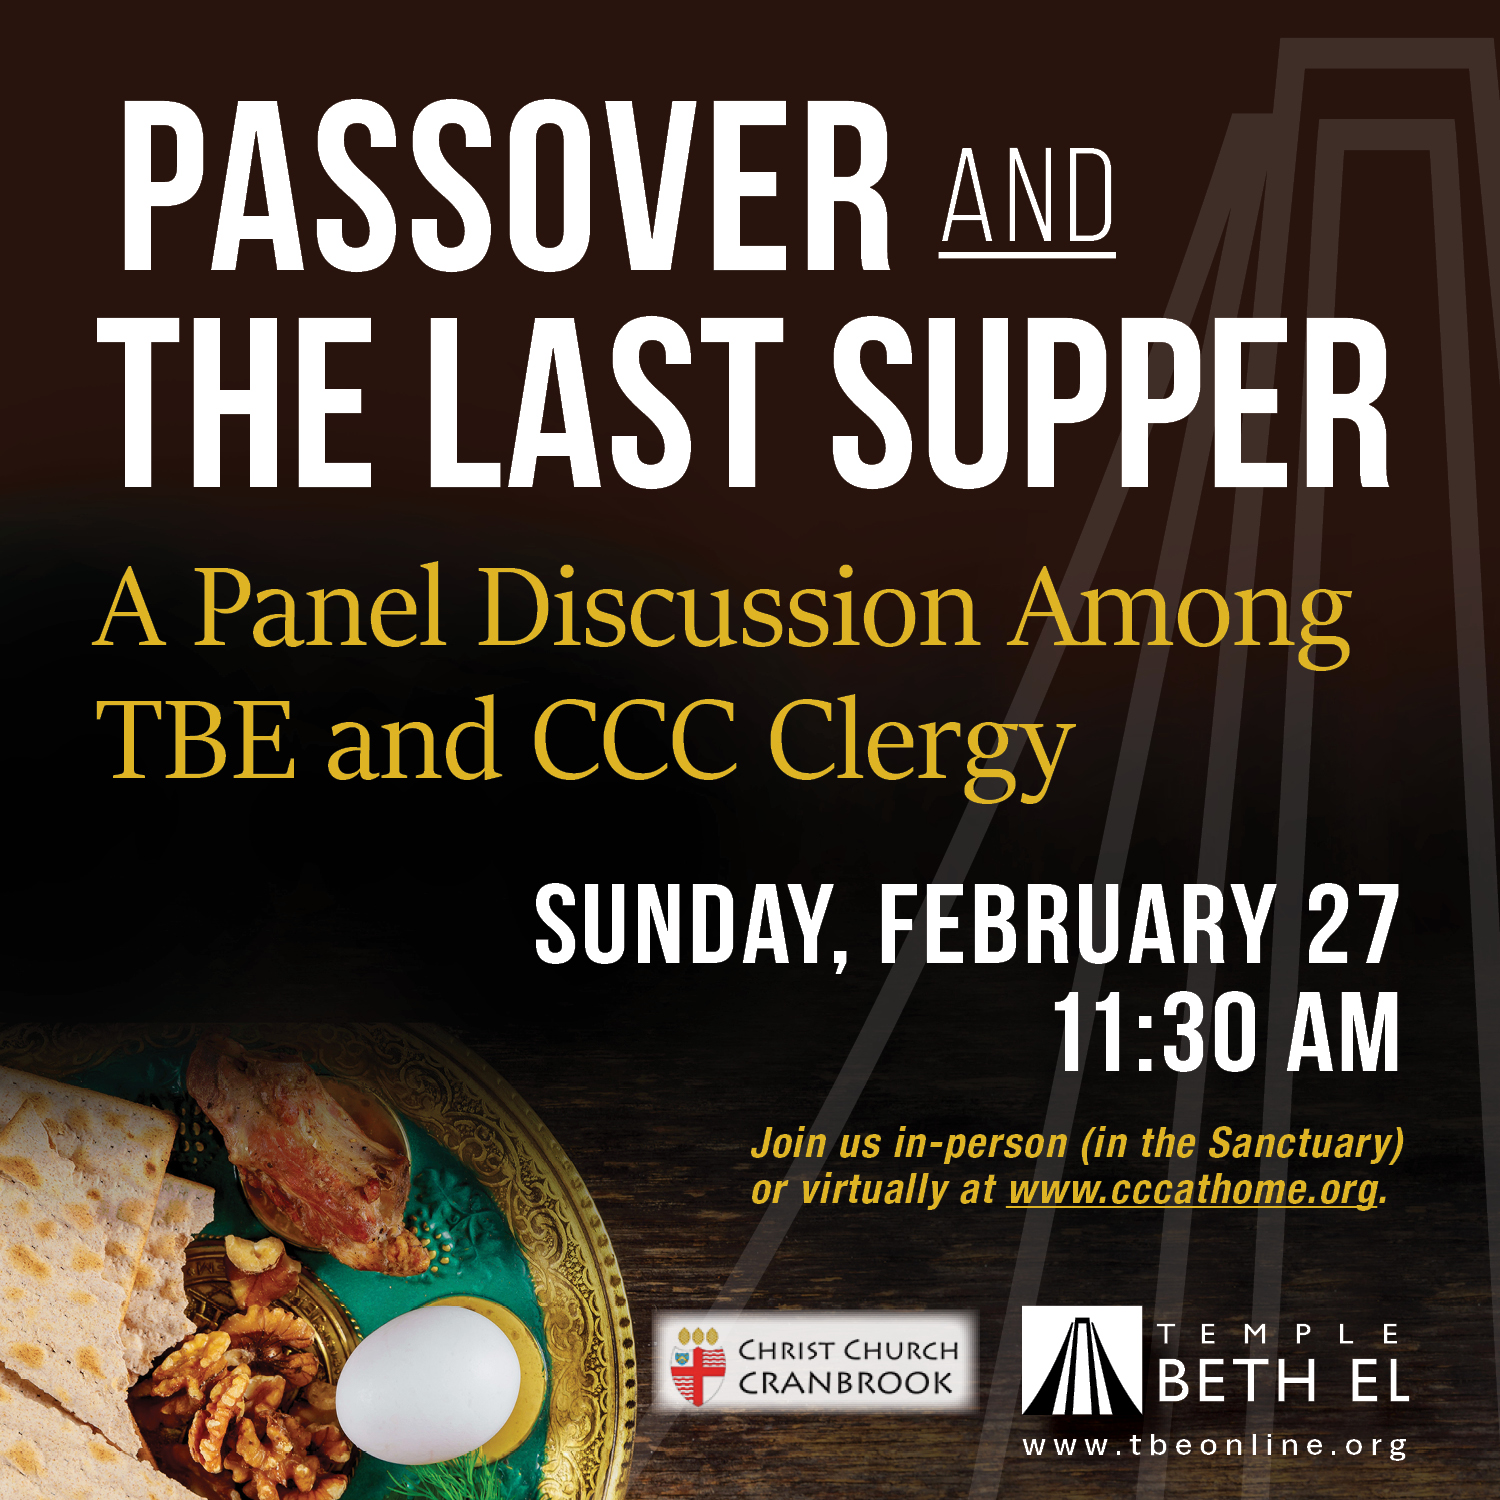 Passover and The Last Supper